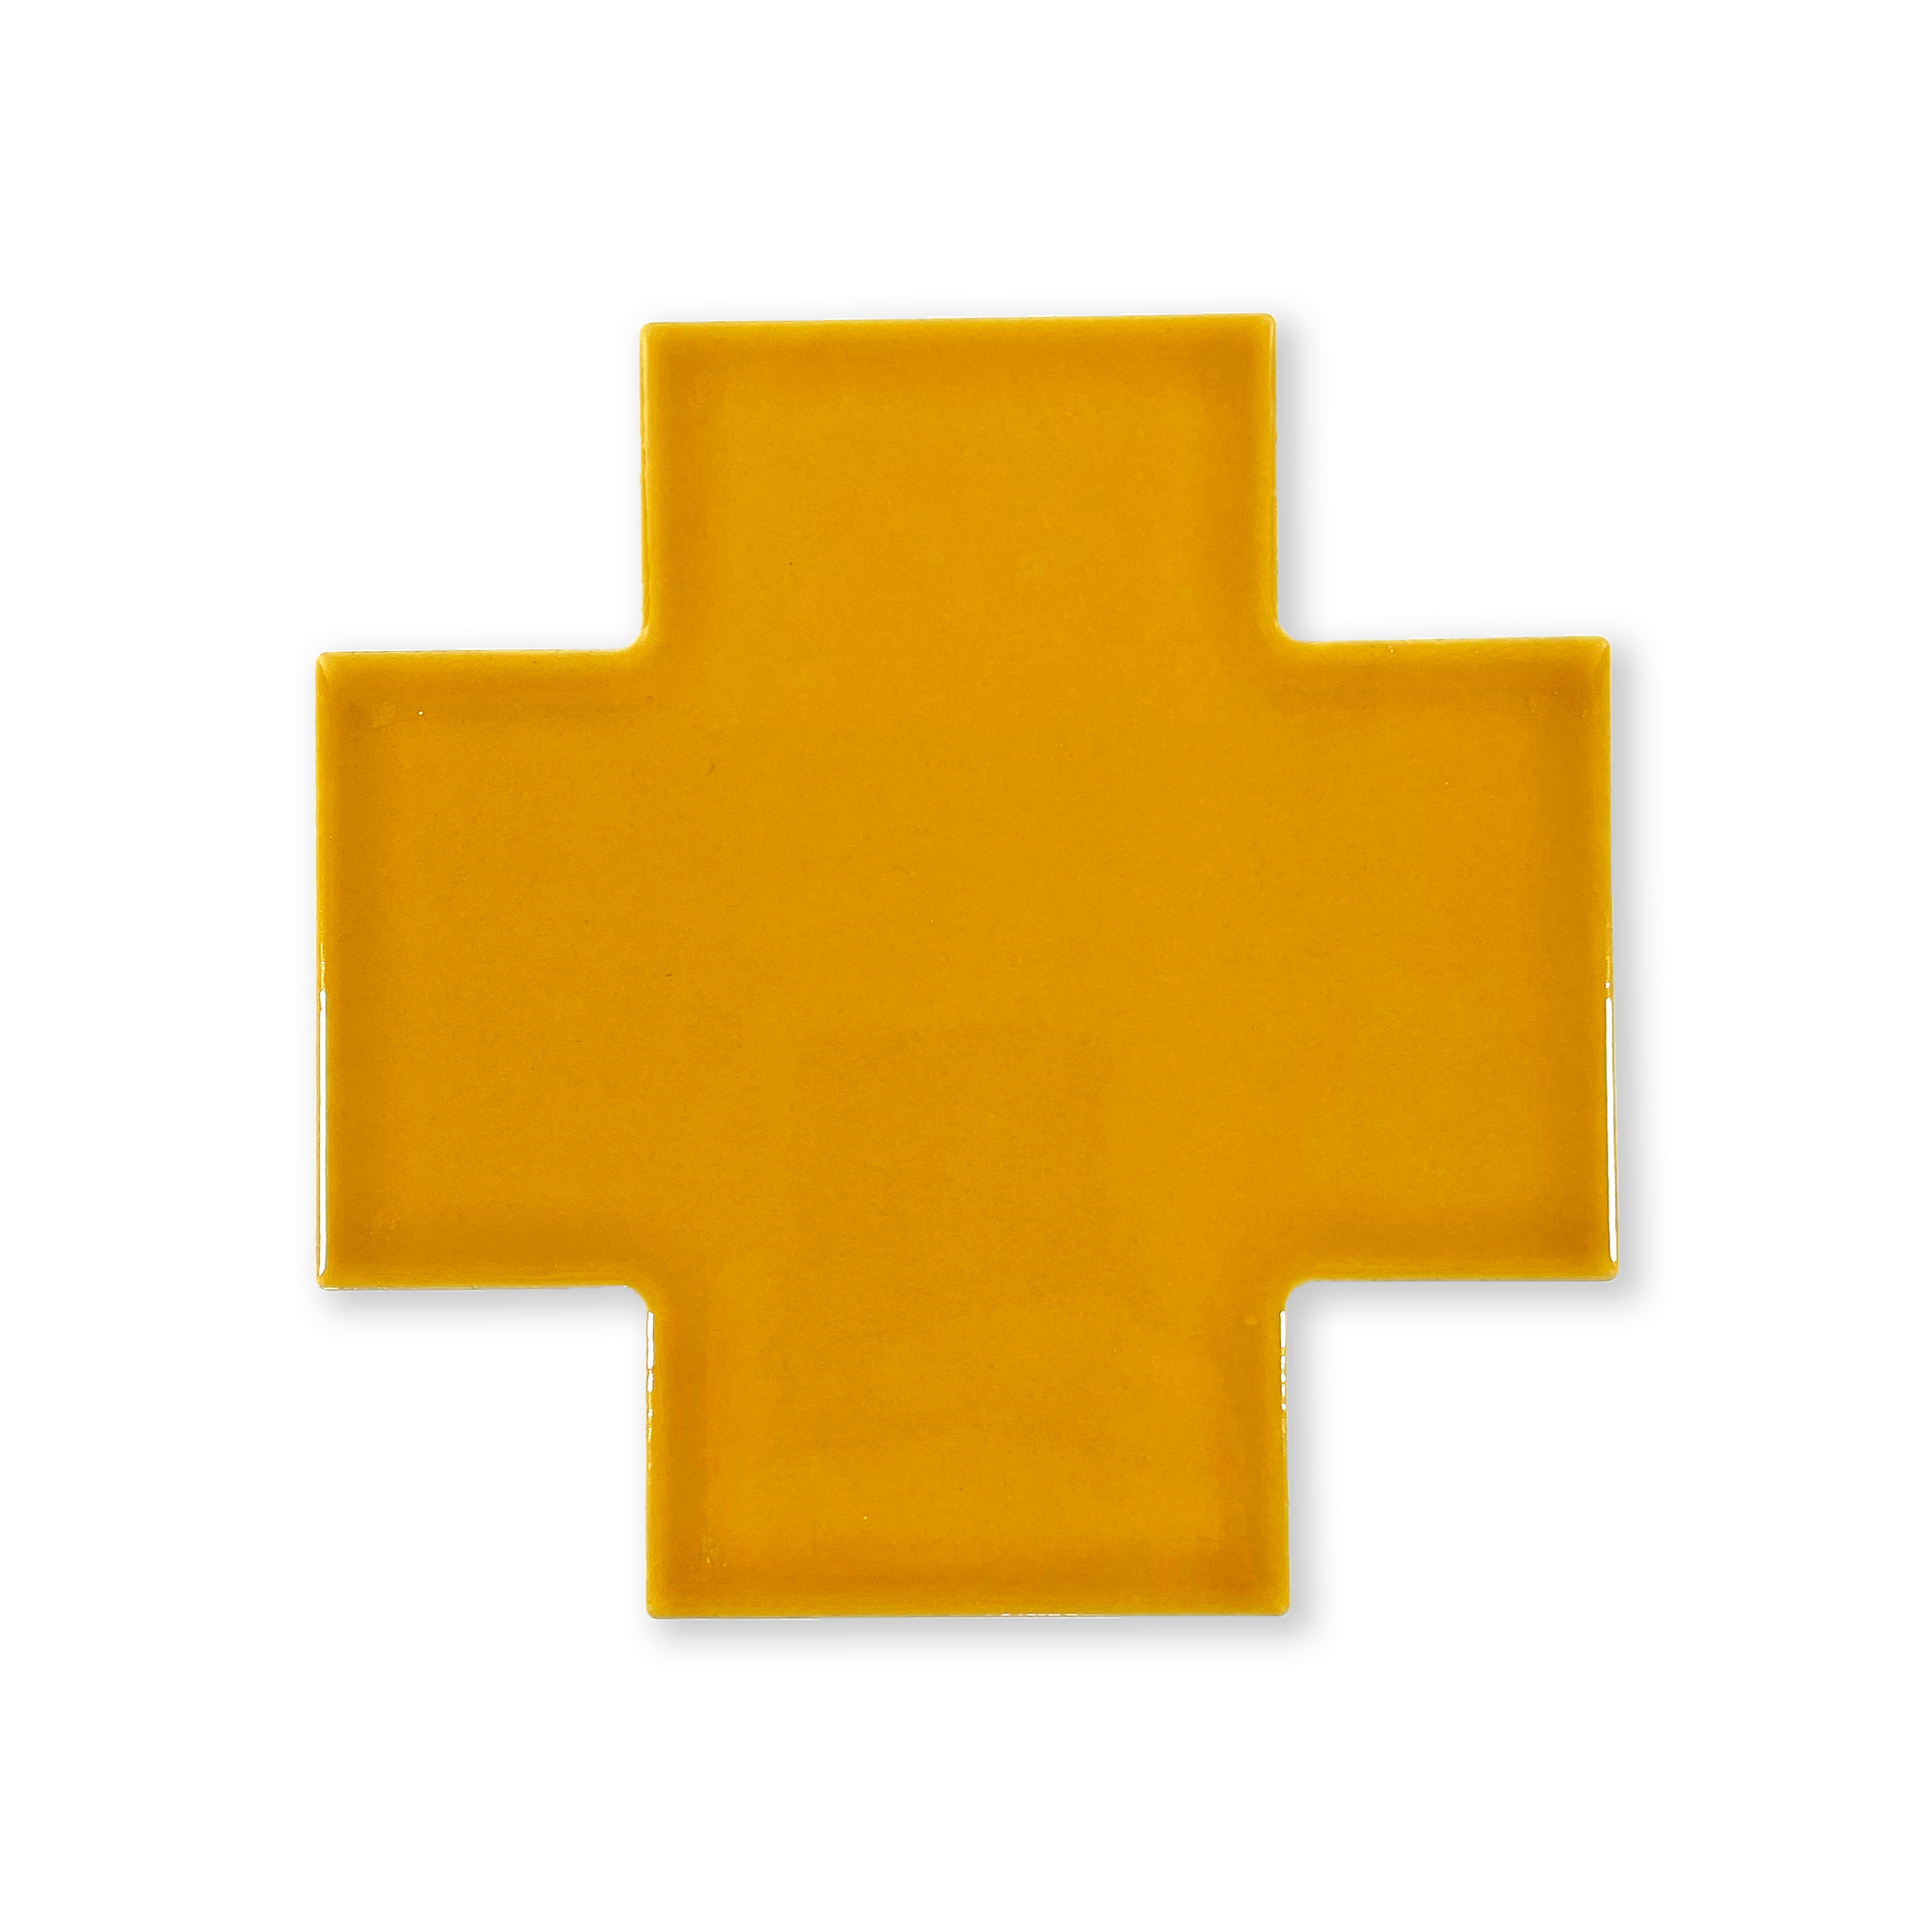 Puzzle Plus 6x6 Mustard Yellow Glossy Subway Tile